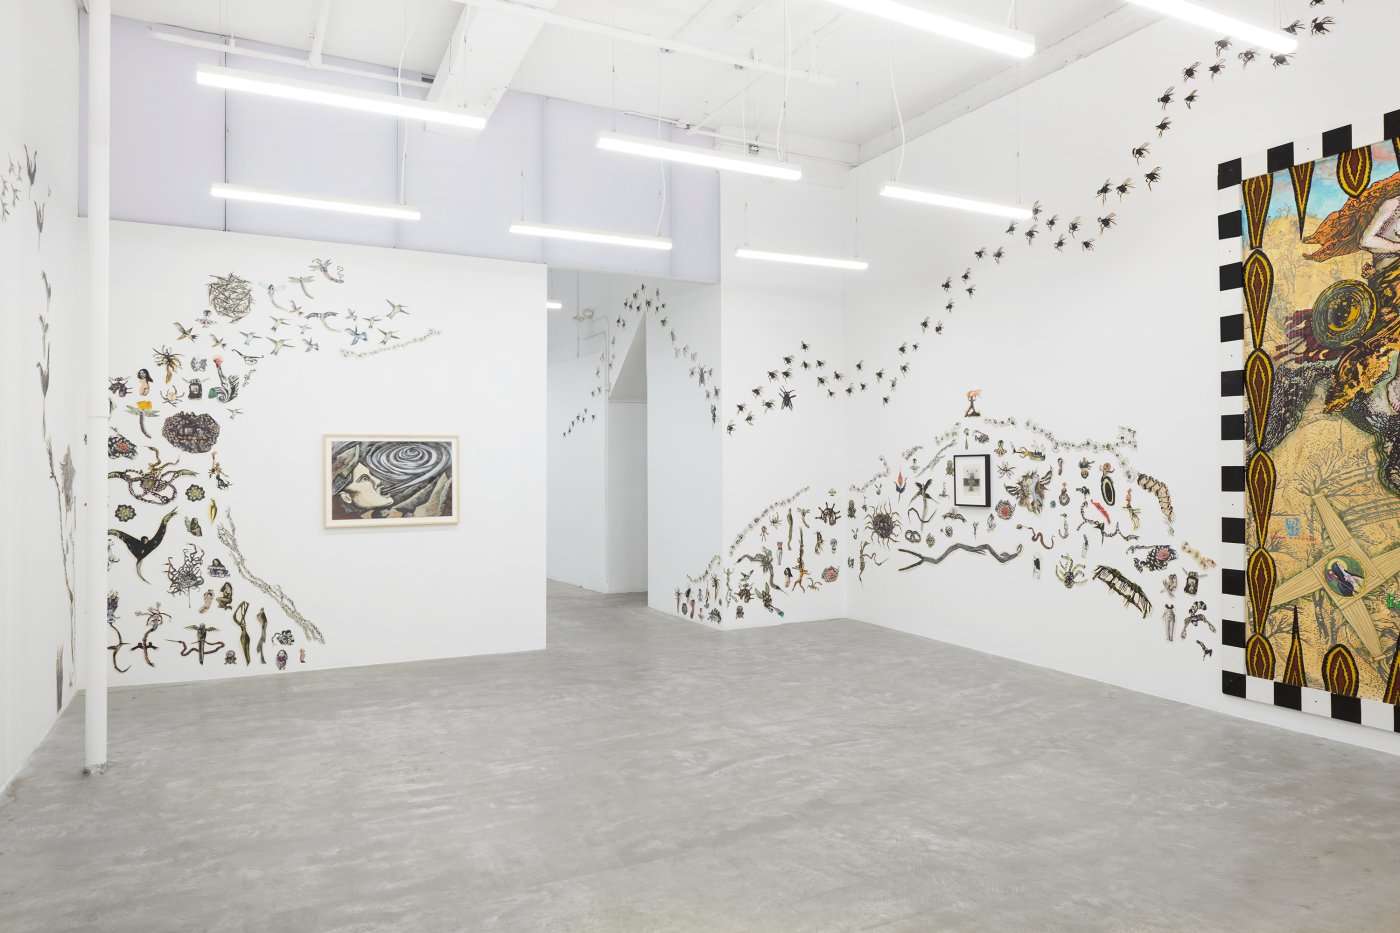 Installation image for Mary Beth Edelson: A Celebration, at David Lewis